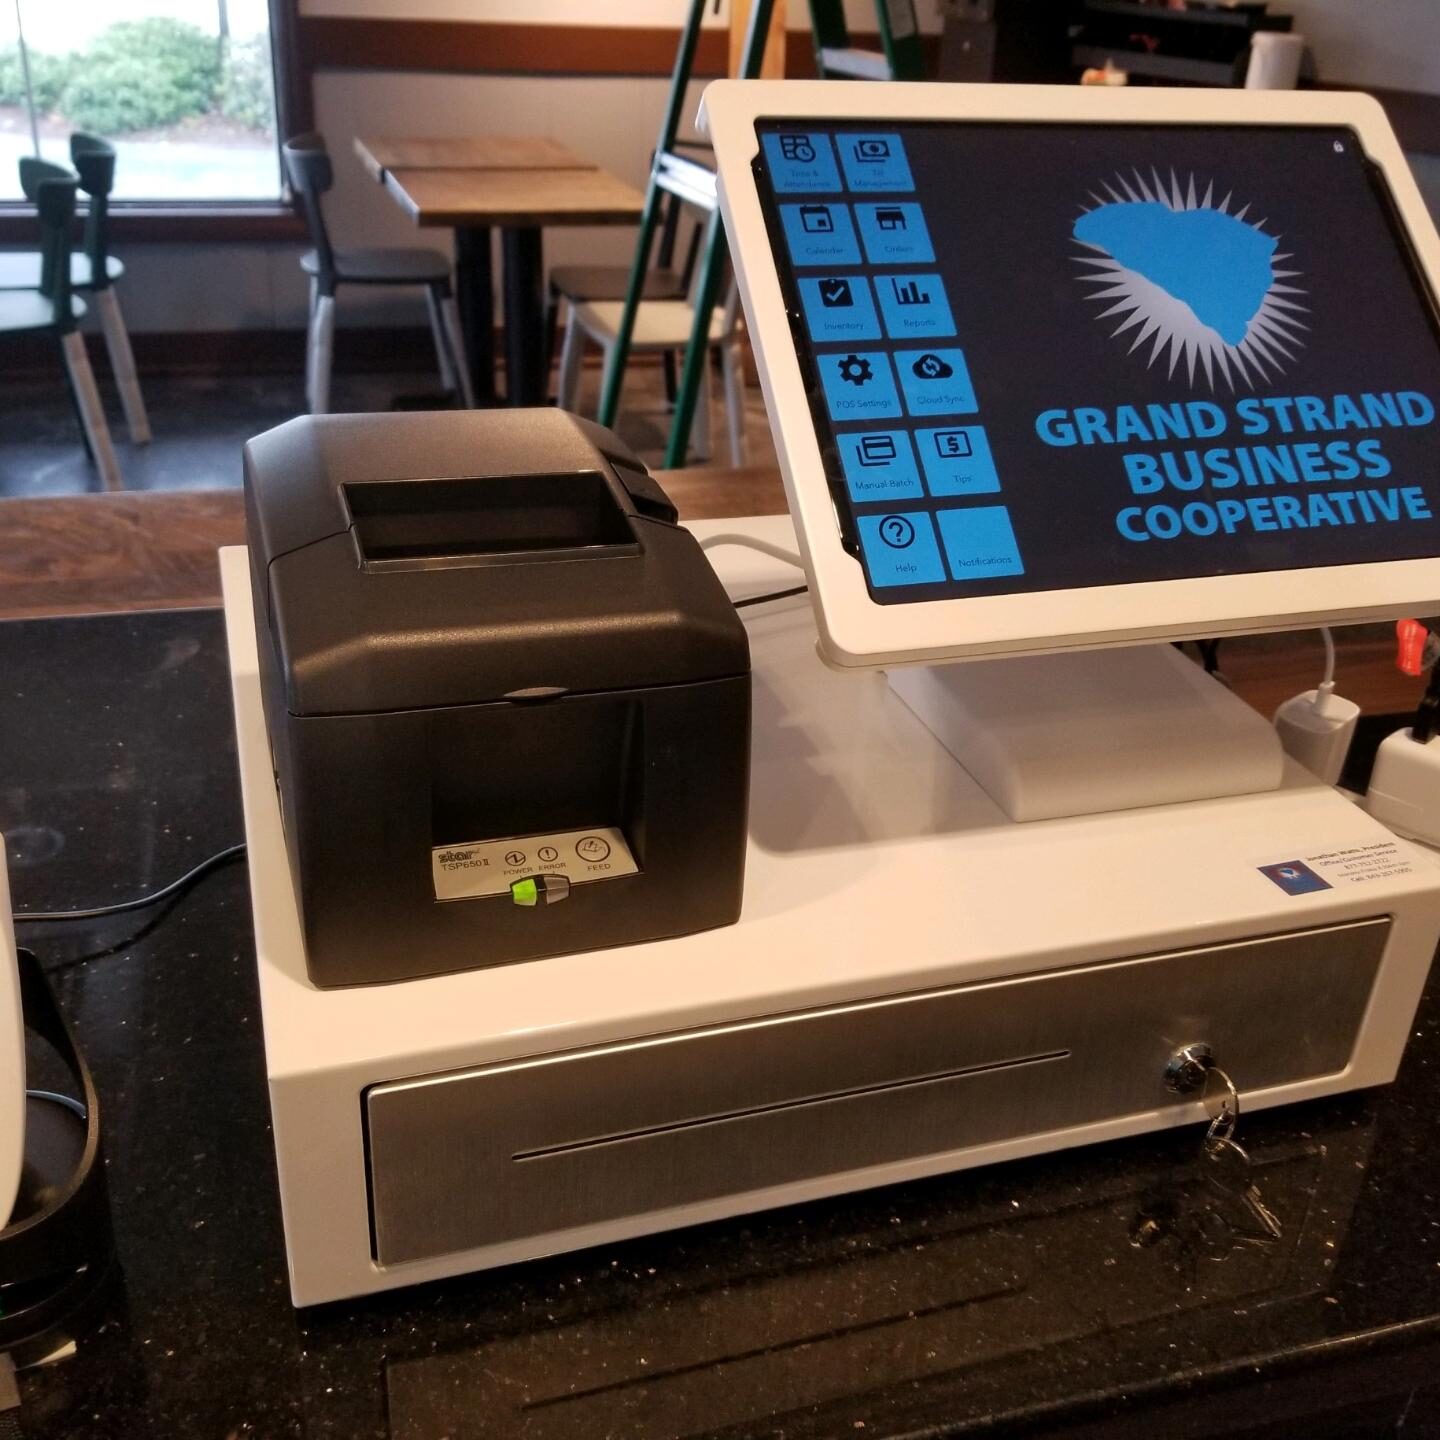 Point of Sale system Register with Receipt Printer, and Barcode Scanner